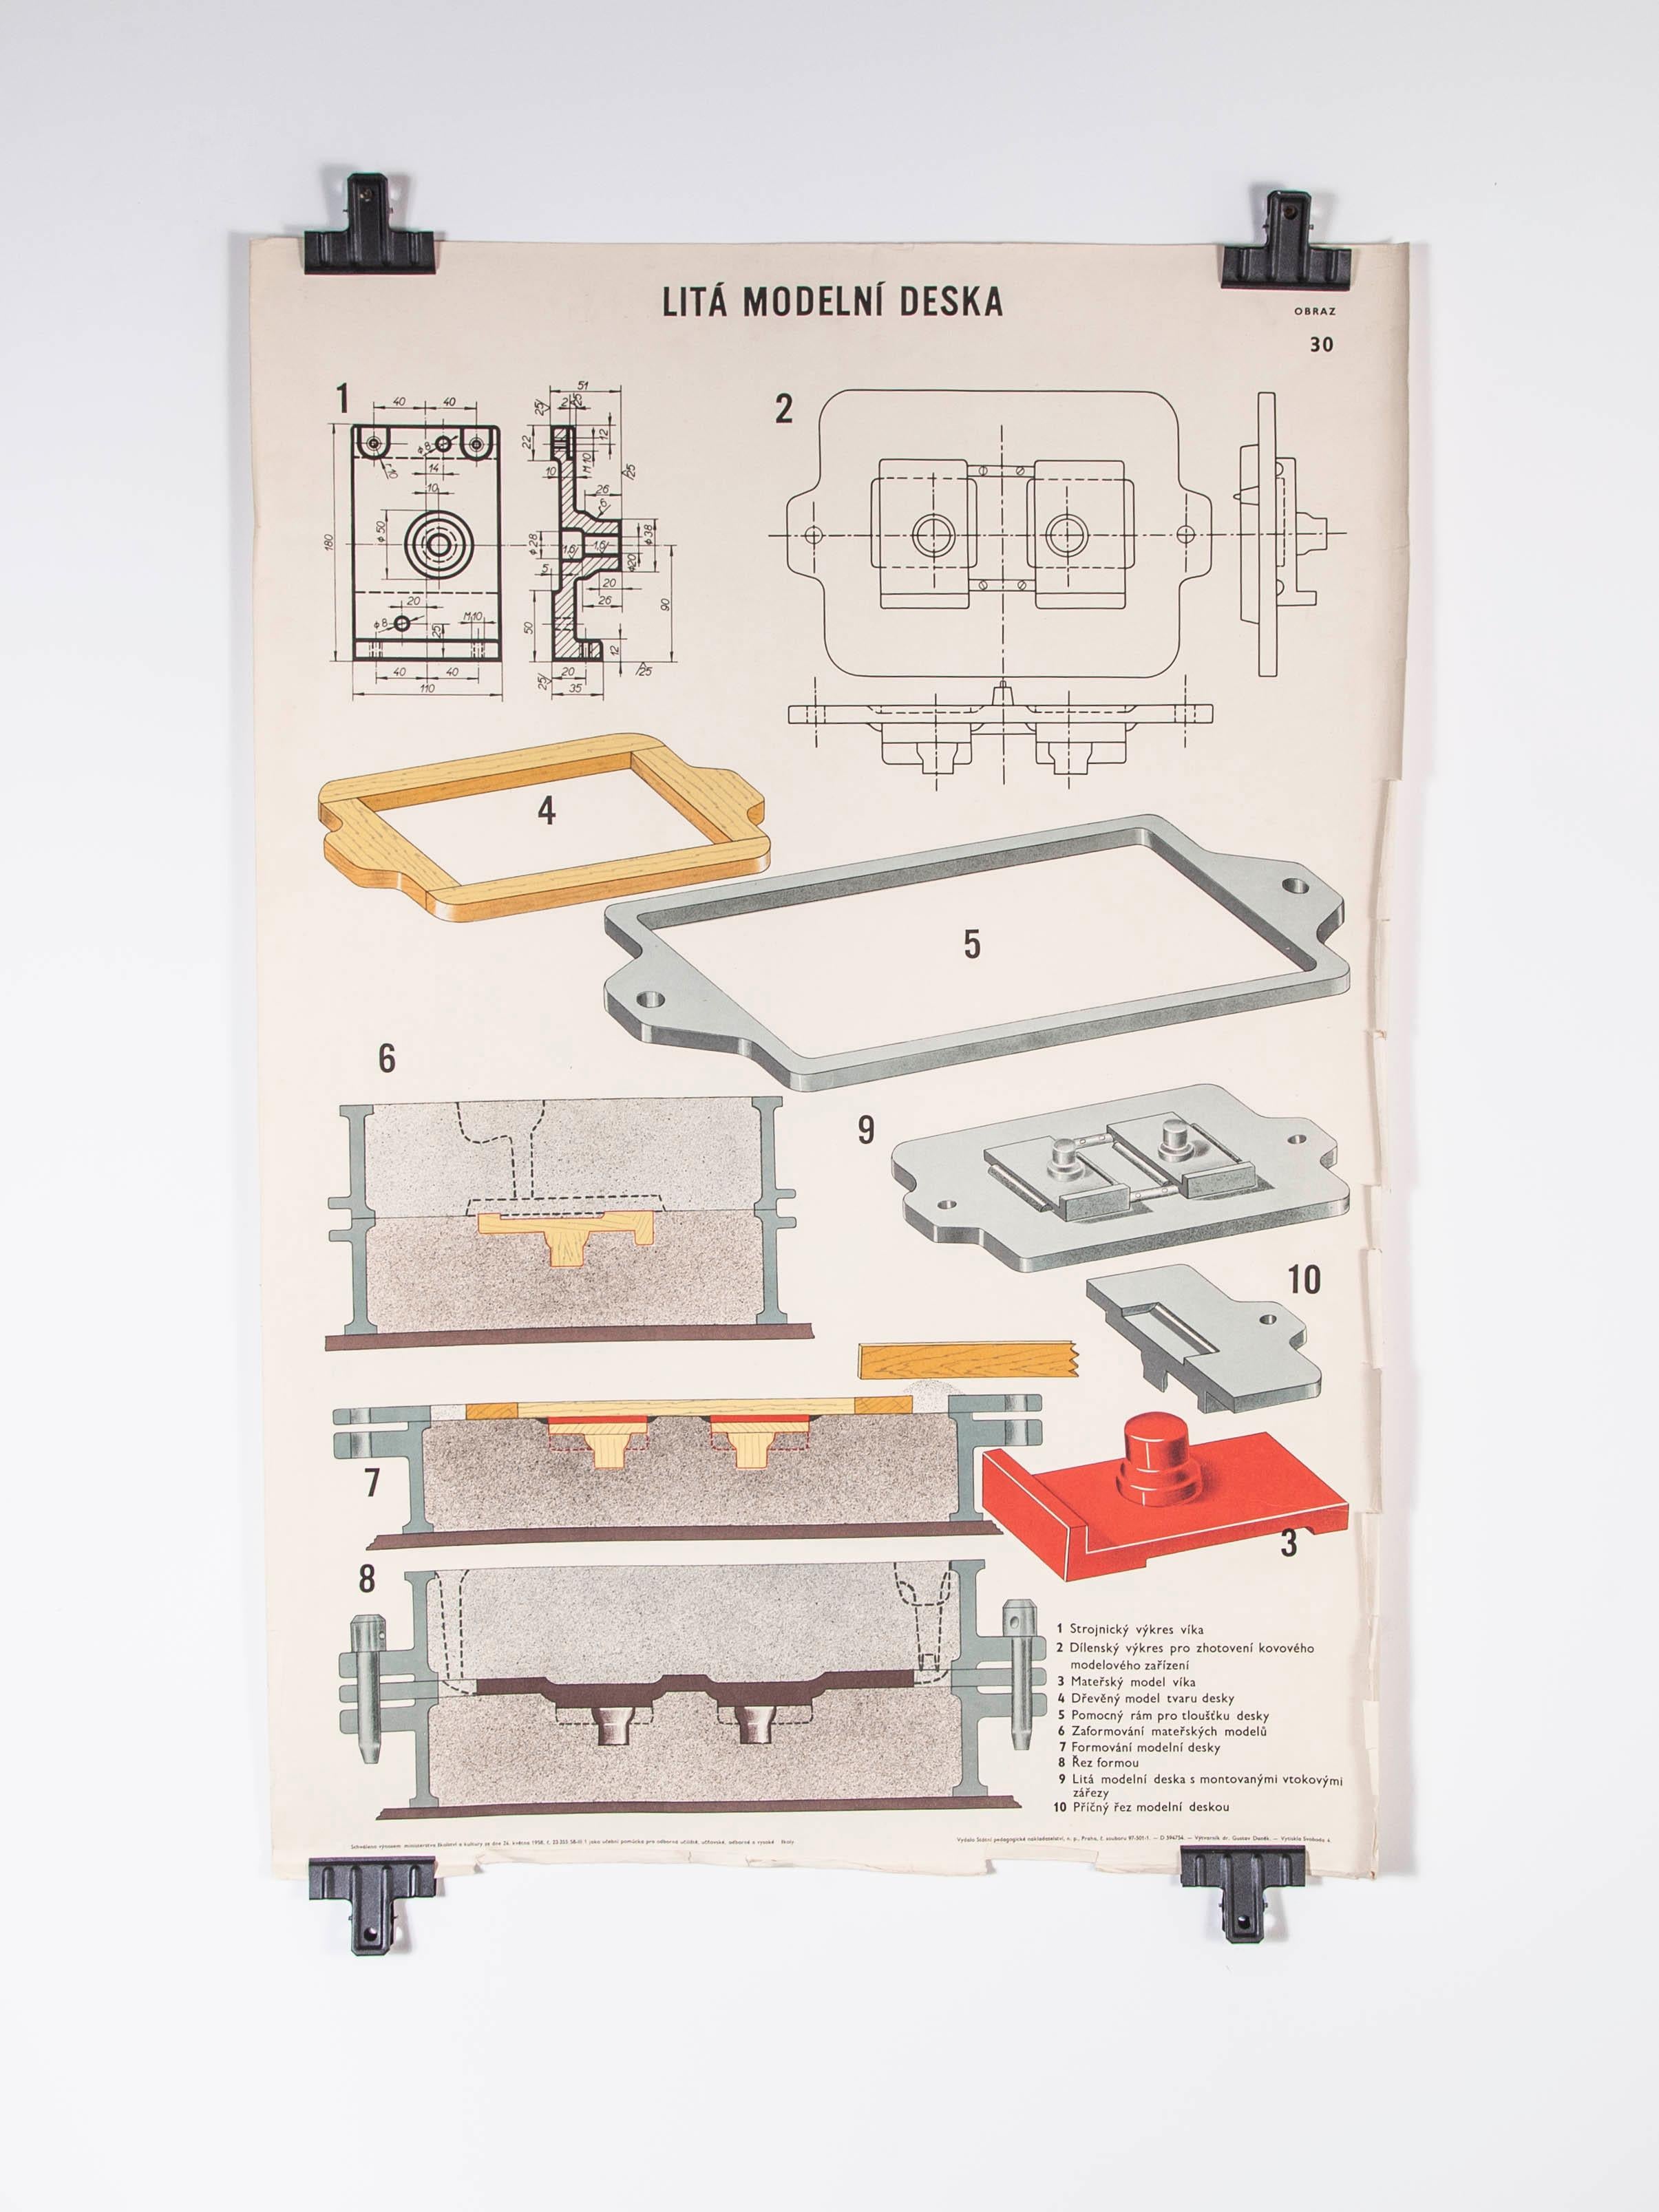 Czech technical industrial drawing, foundry mould engineering poster – 33

Sourced from an old engineering workshop in the Czech Republic, an amazing series of technical Industrial drawings explaining the process of sand casting and creating the